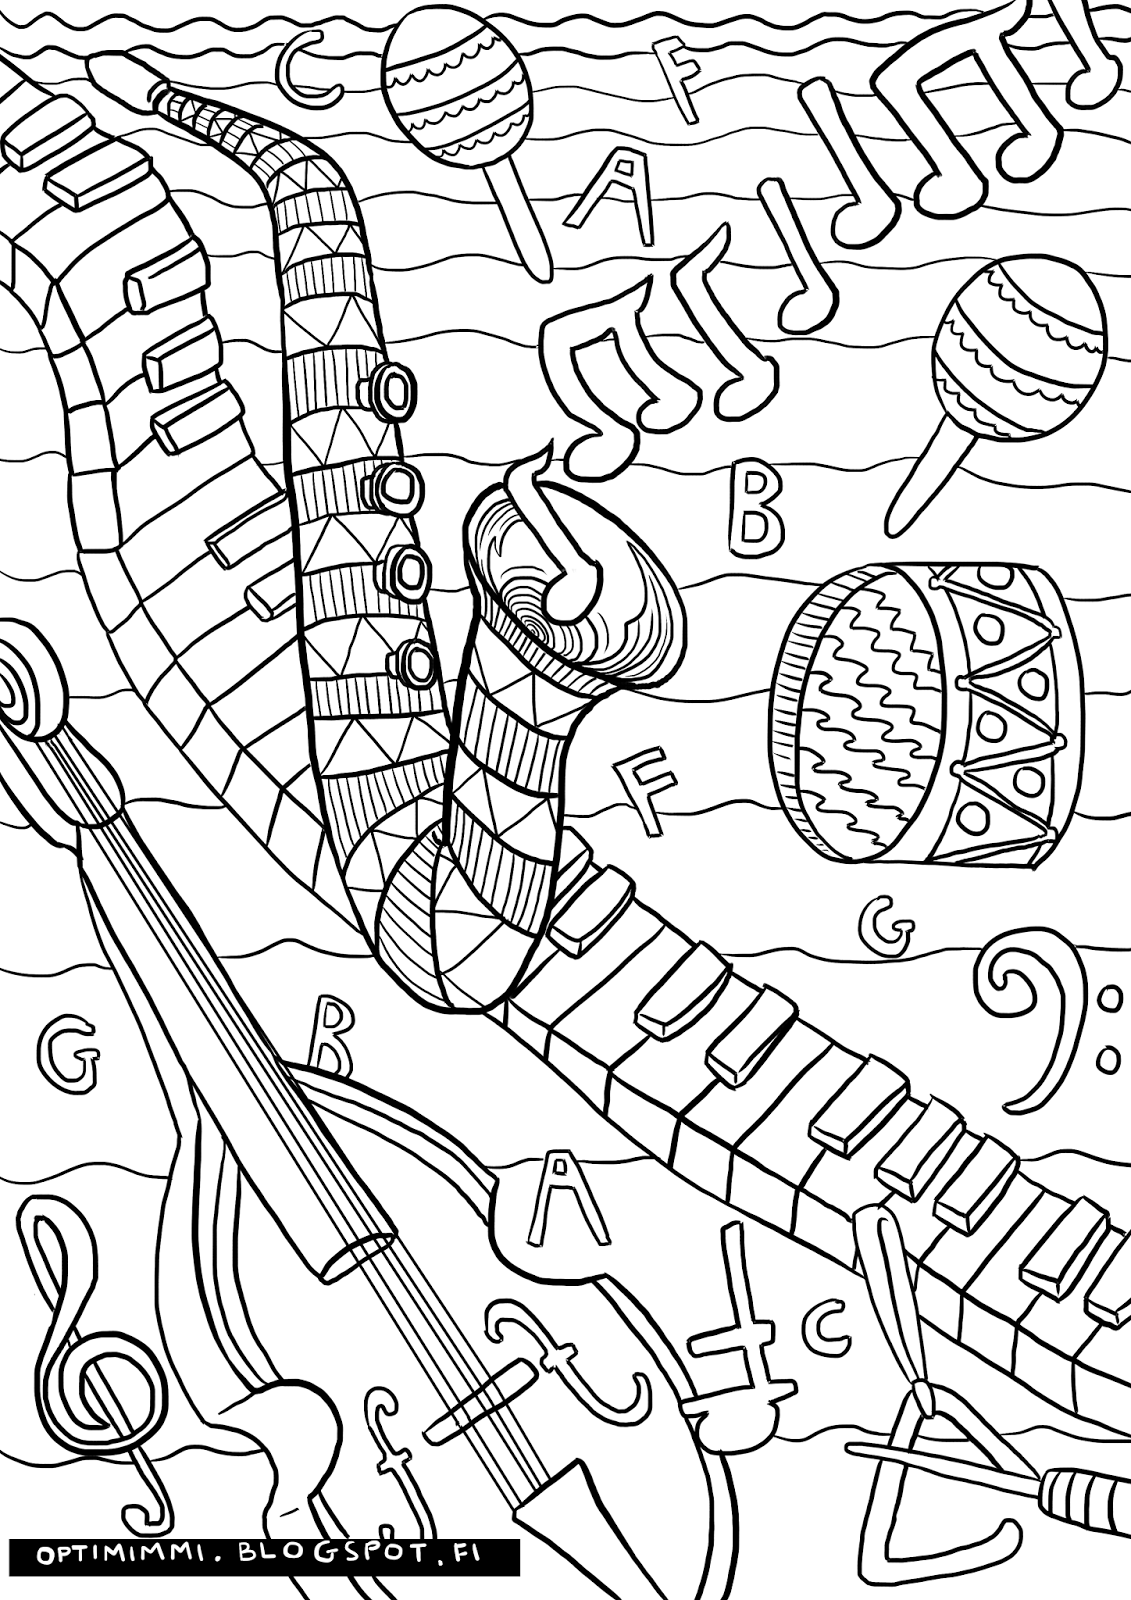 music coloring sheets optimimmi 2016 coloring pages 2016 värityskuvat sheets music coloring 